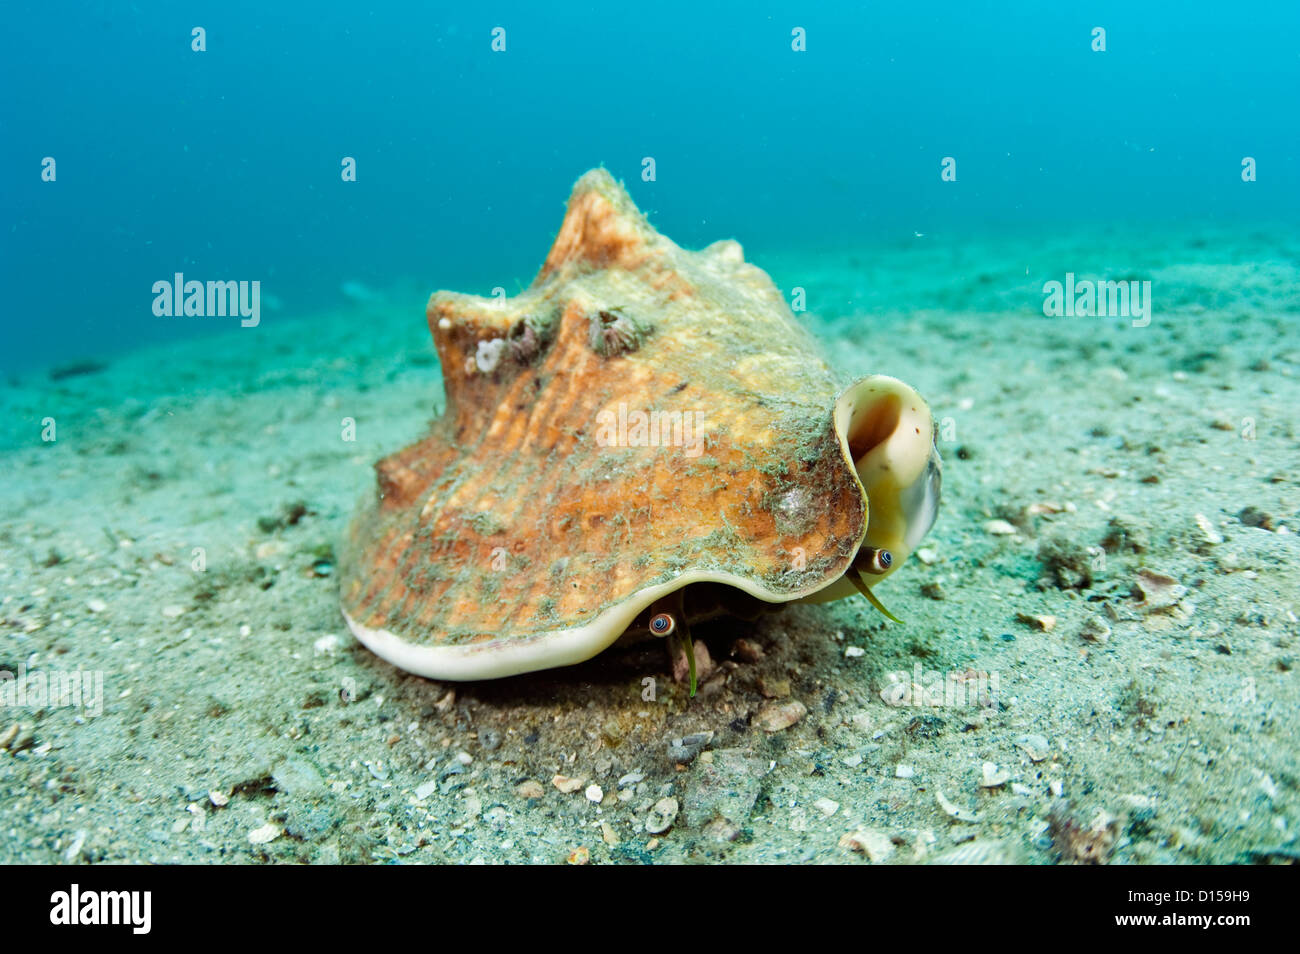 A Queen Conch, Strombus gigas, a protected species in Florida, crawls over a coral reef offshore Palm Beach. Stock Photo